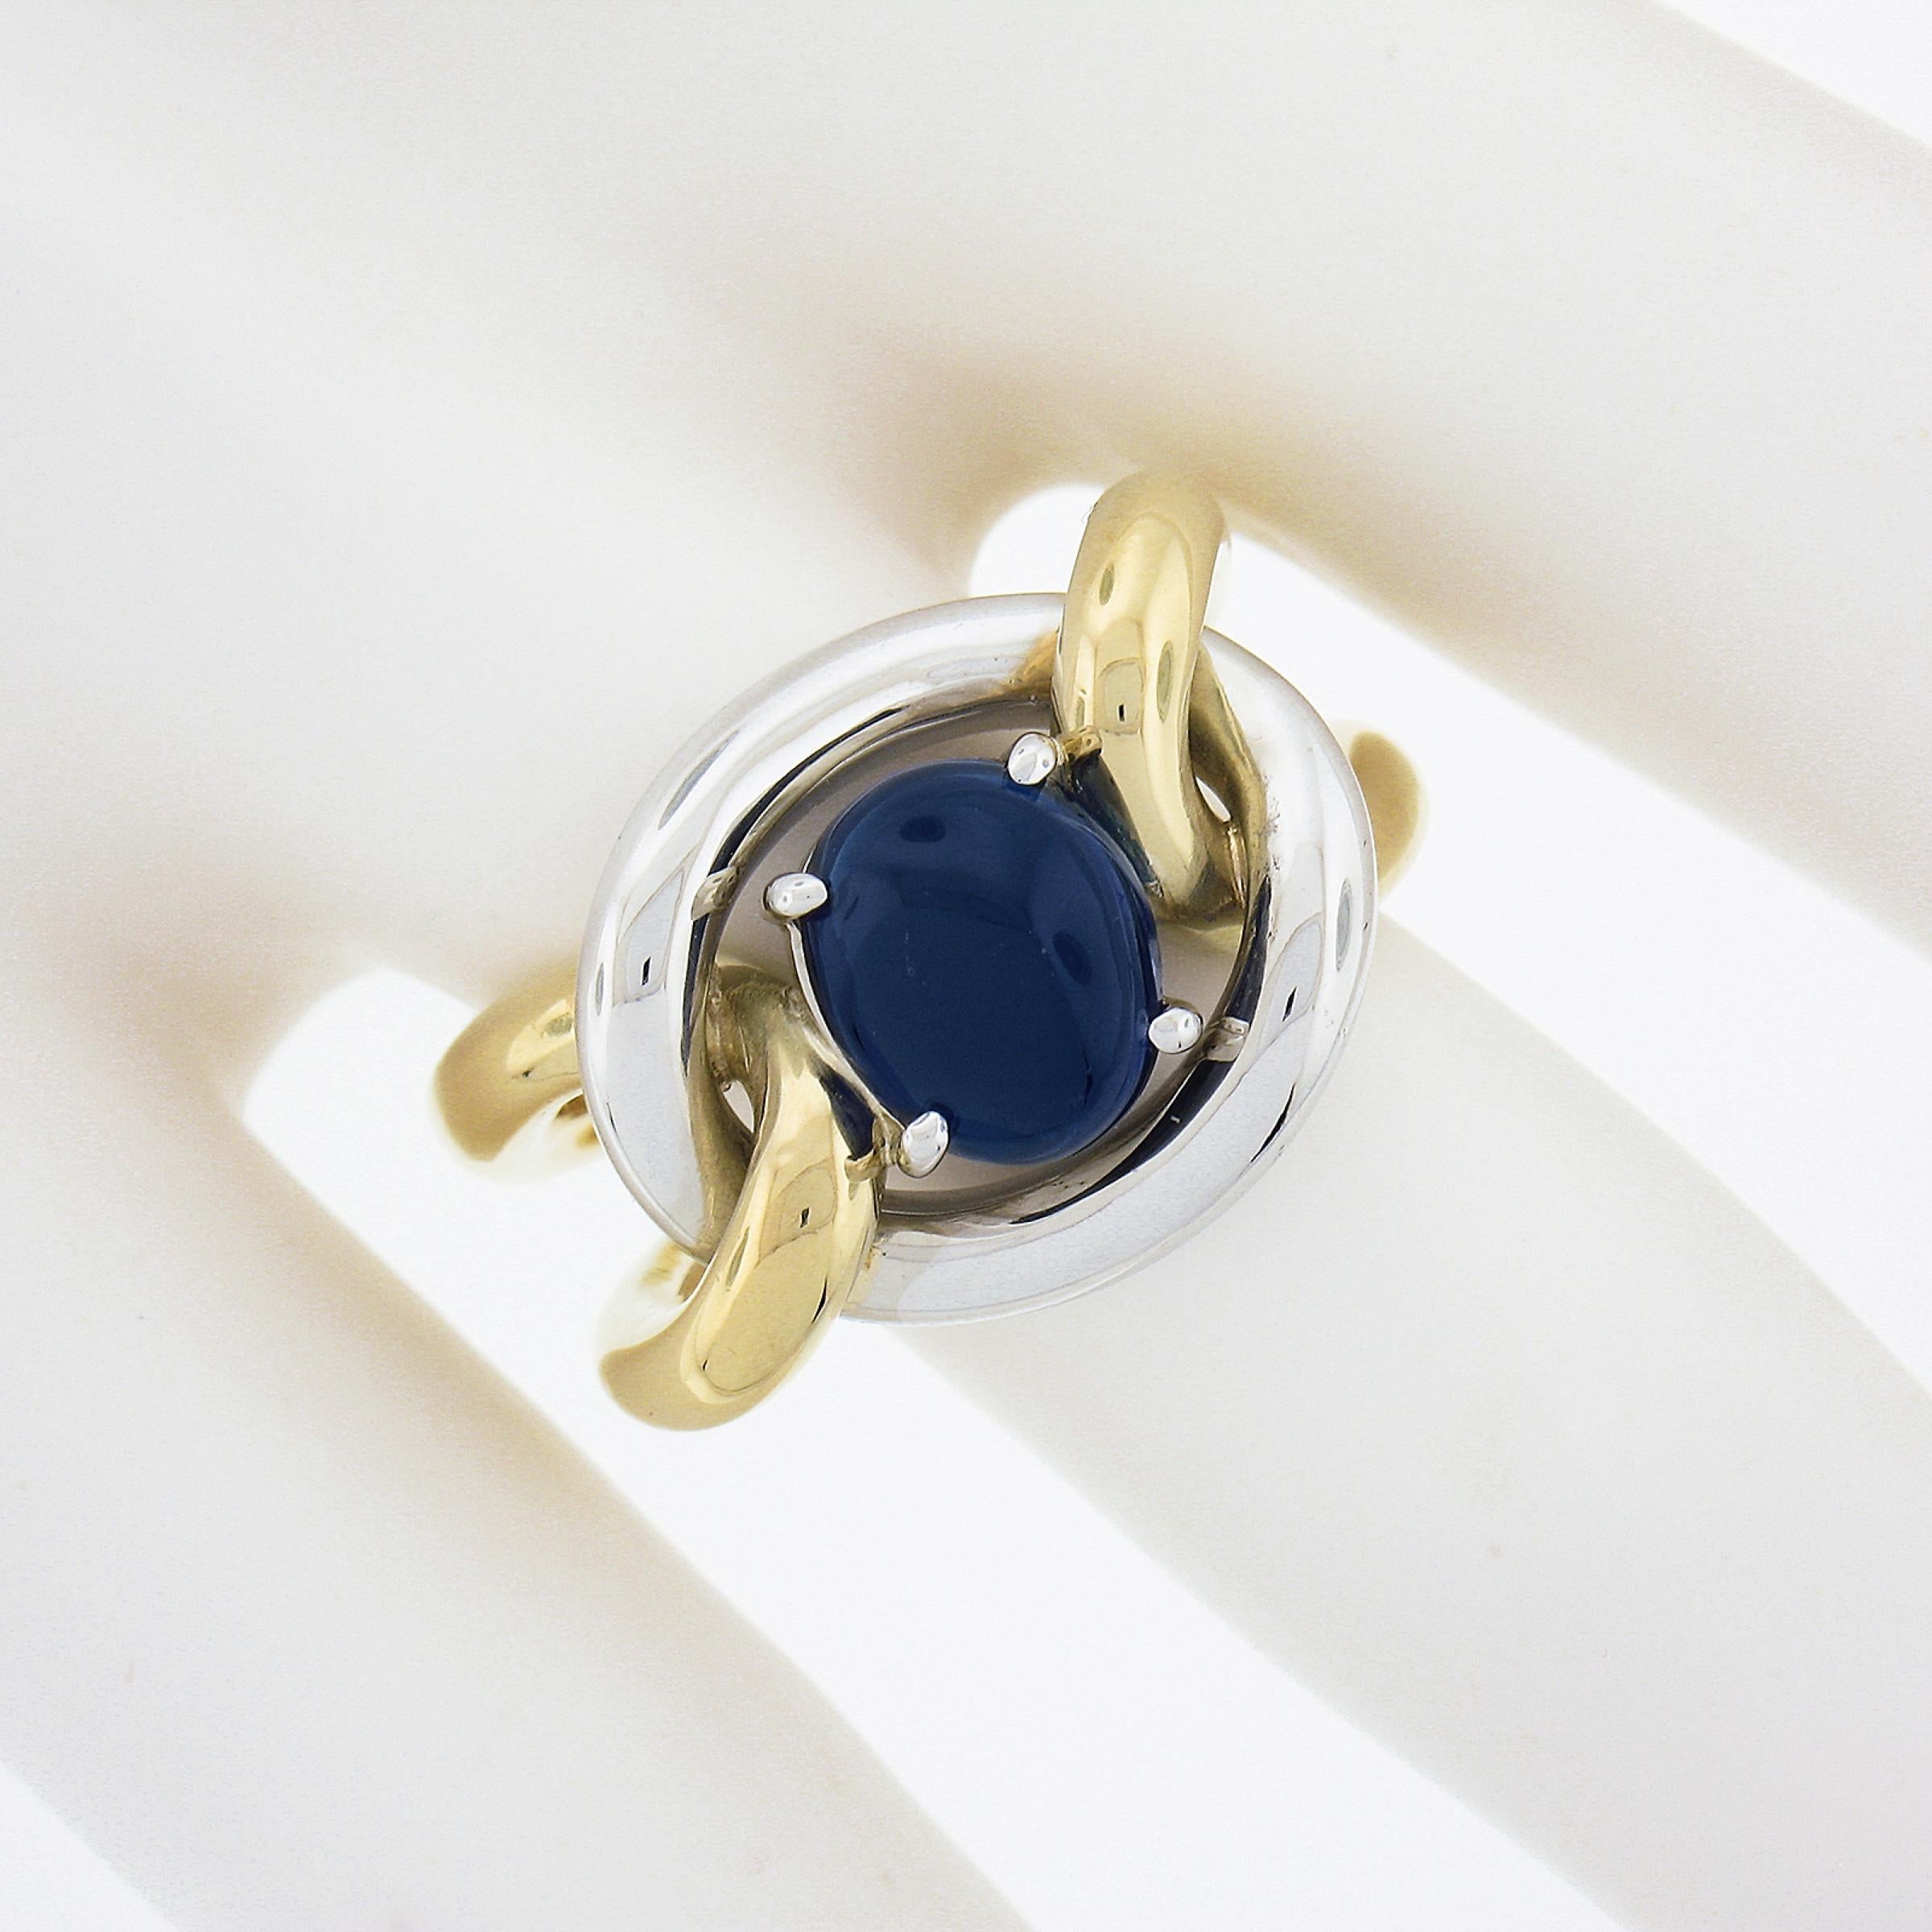 Handmade 18K TT Gold GIA No Heat Oval Cabochon Blue Sapphire Knot Cocktail Ring In Excellent Condition For Sale In Montclair, NJ